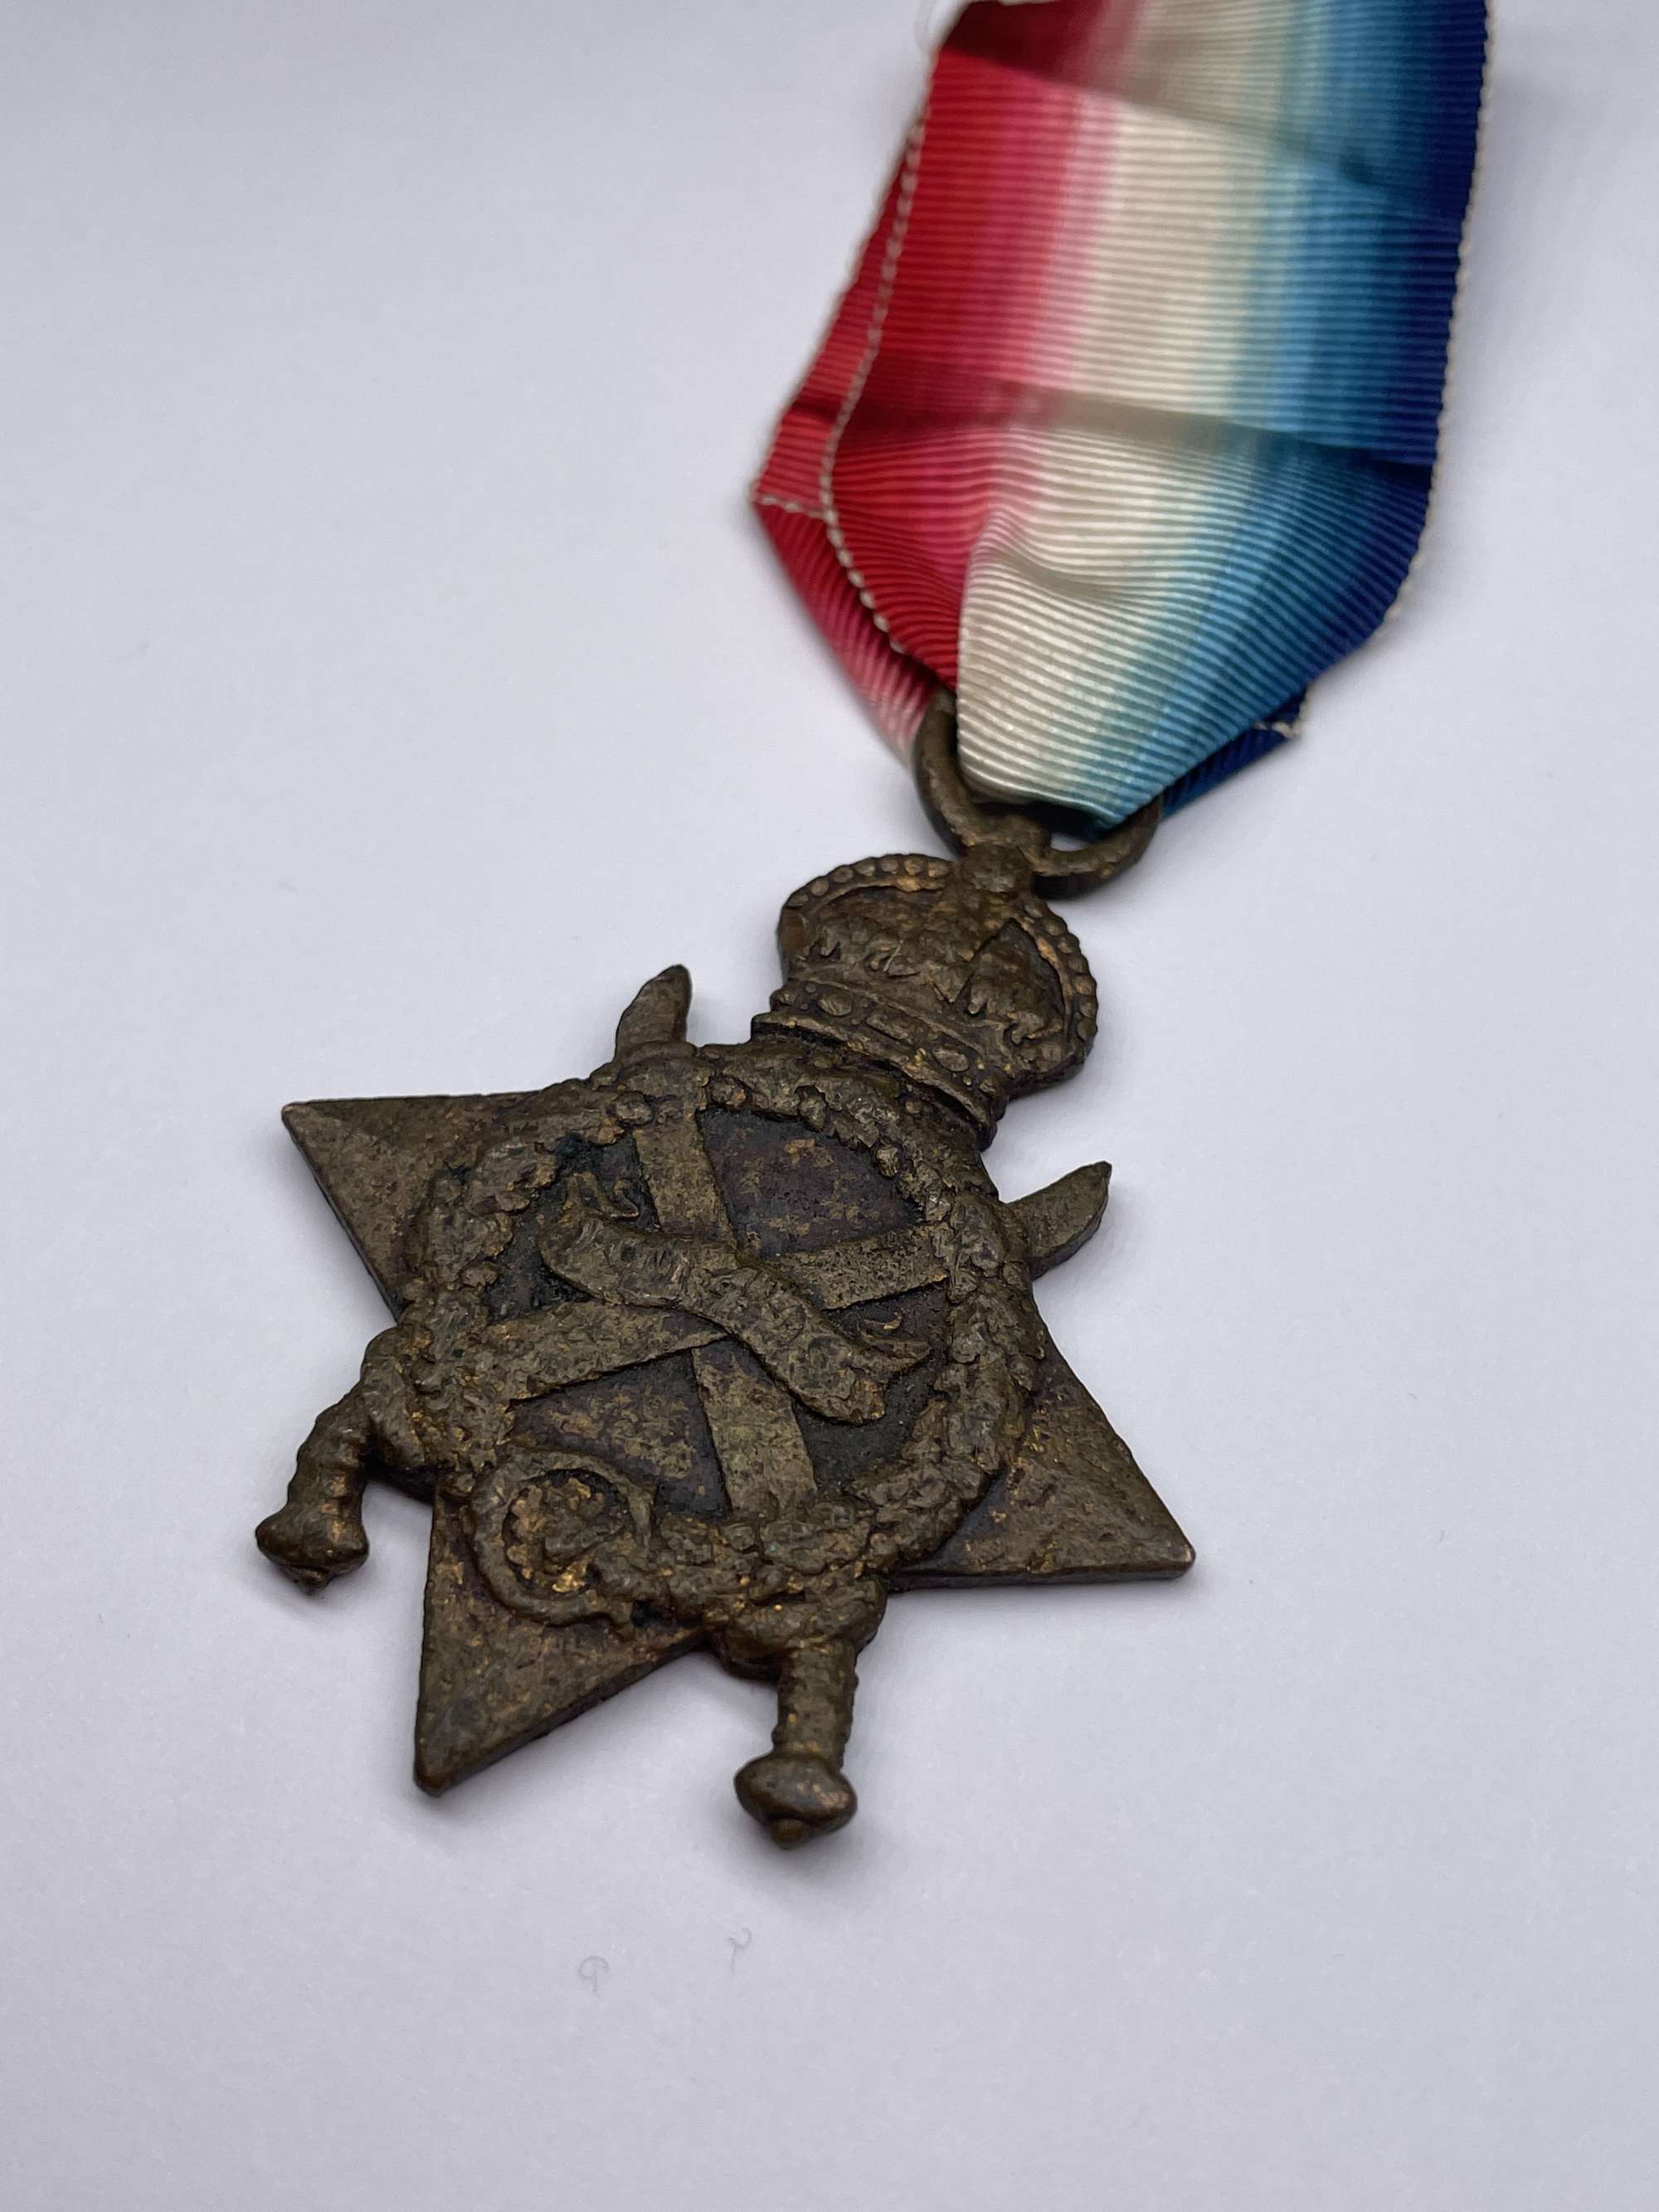 Damaged Original World War One 1914/15 Star, Pte. Mays, 5th Canadian, Killed In Action